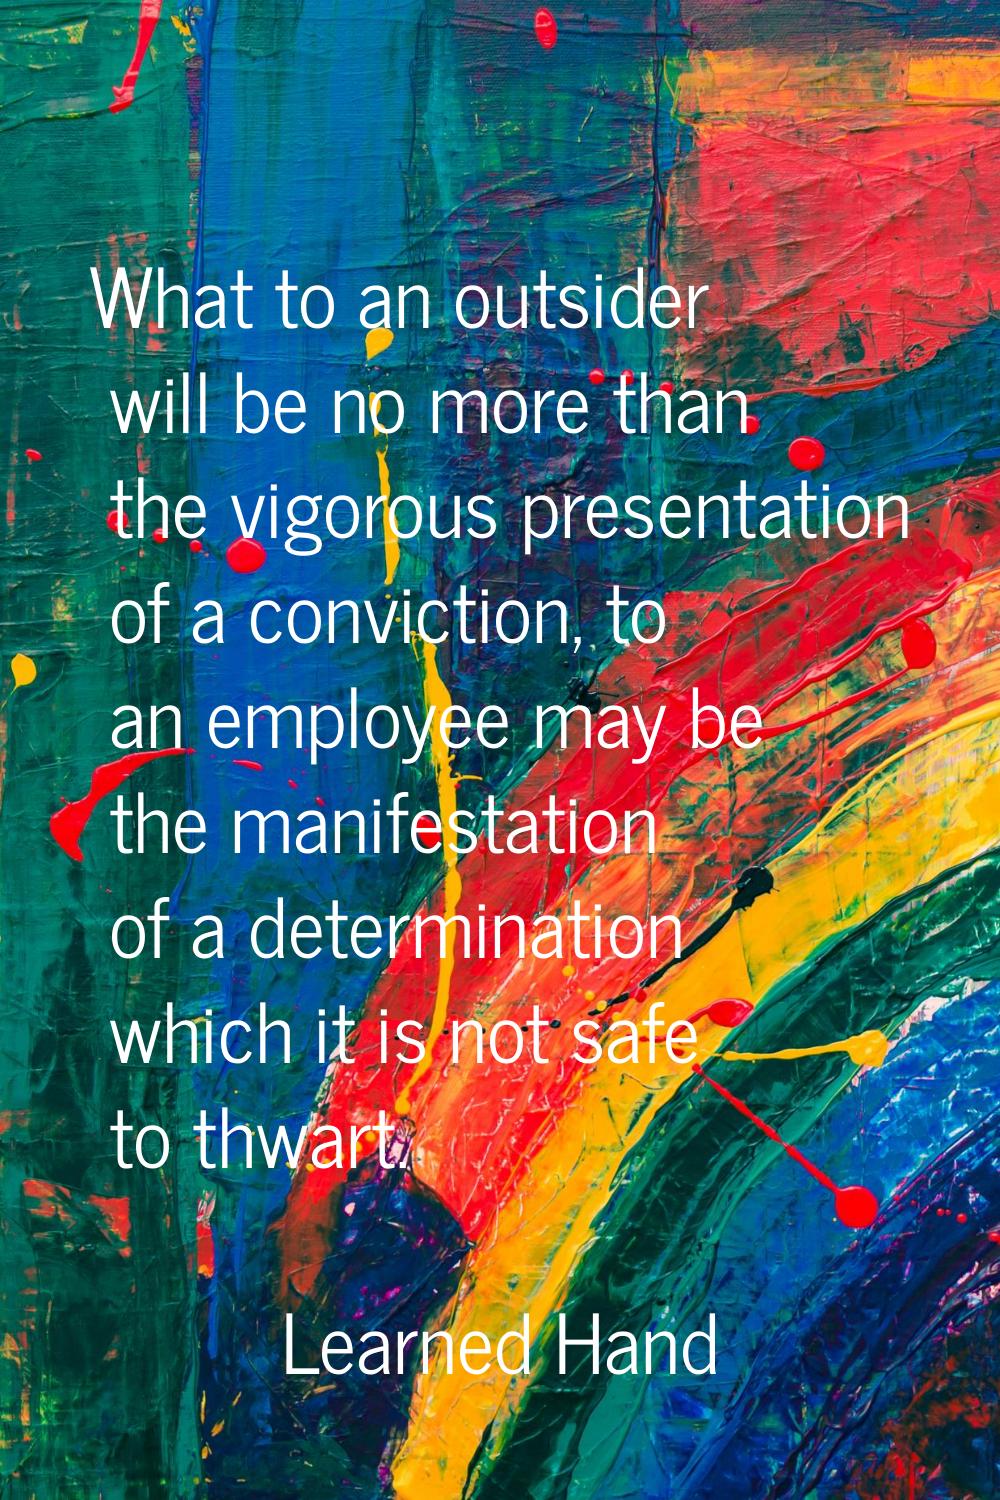 What to an outsider will be no more than the vigorous presentation of a conviction, to an employee 